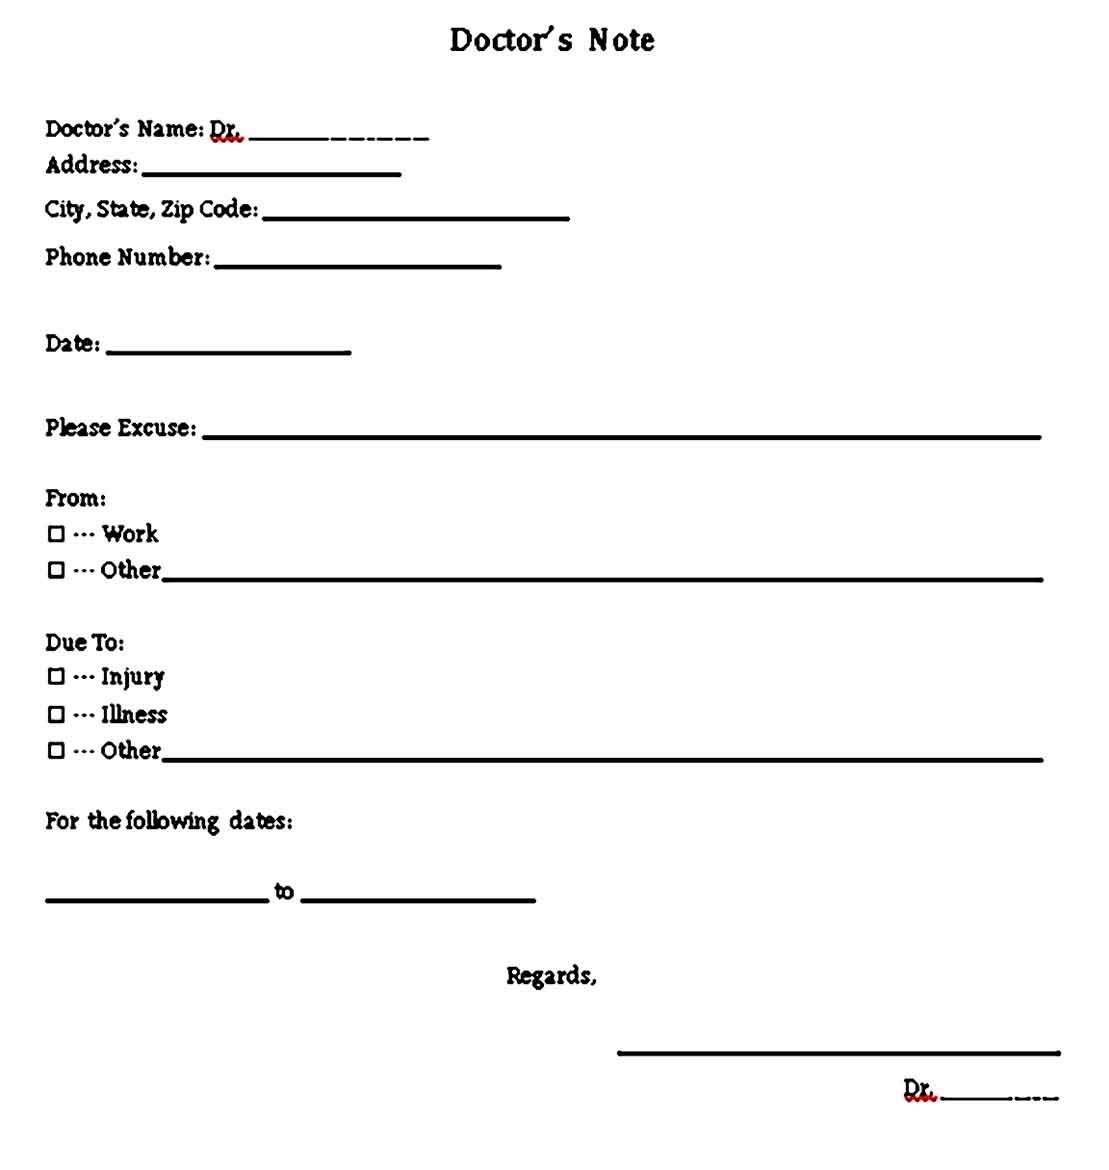 free download doctors notes template0